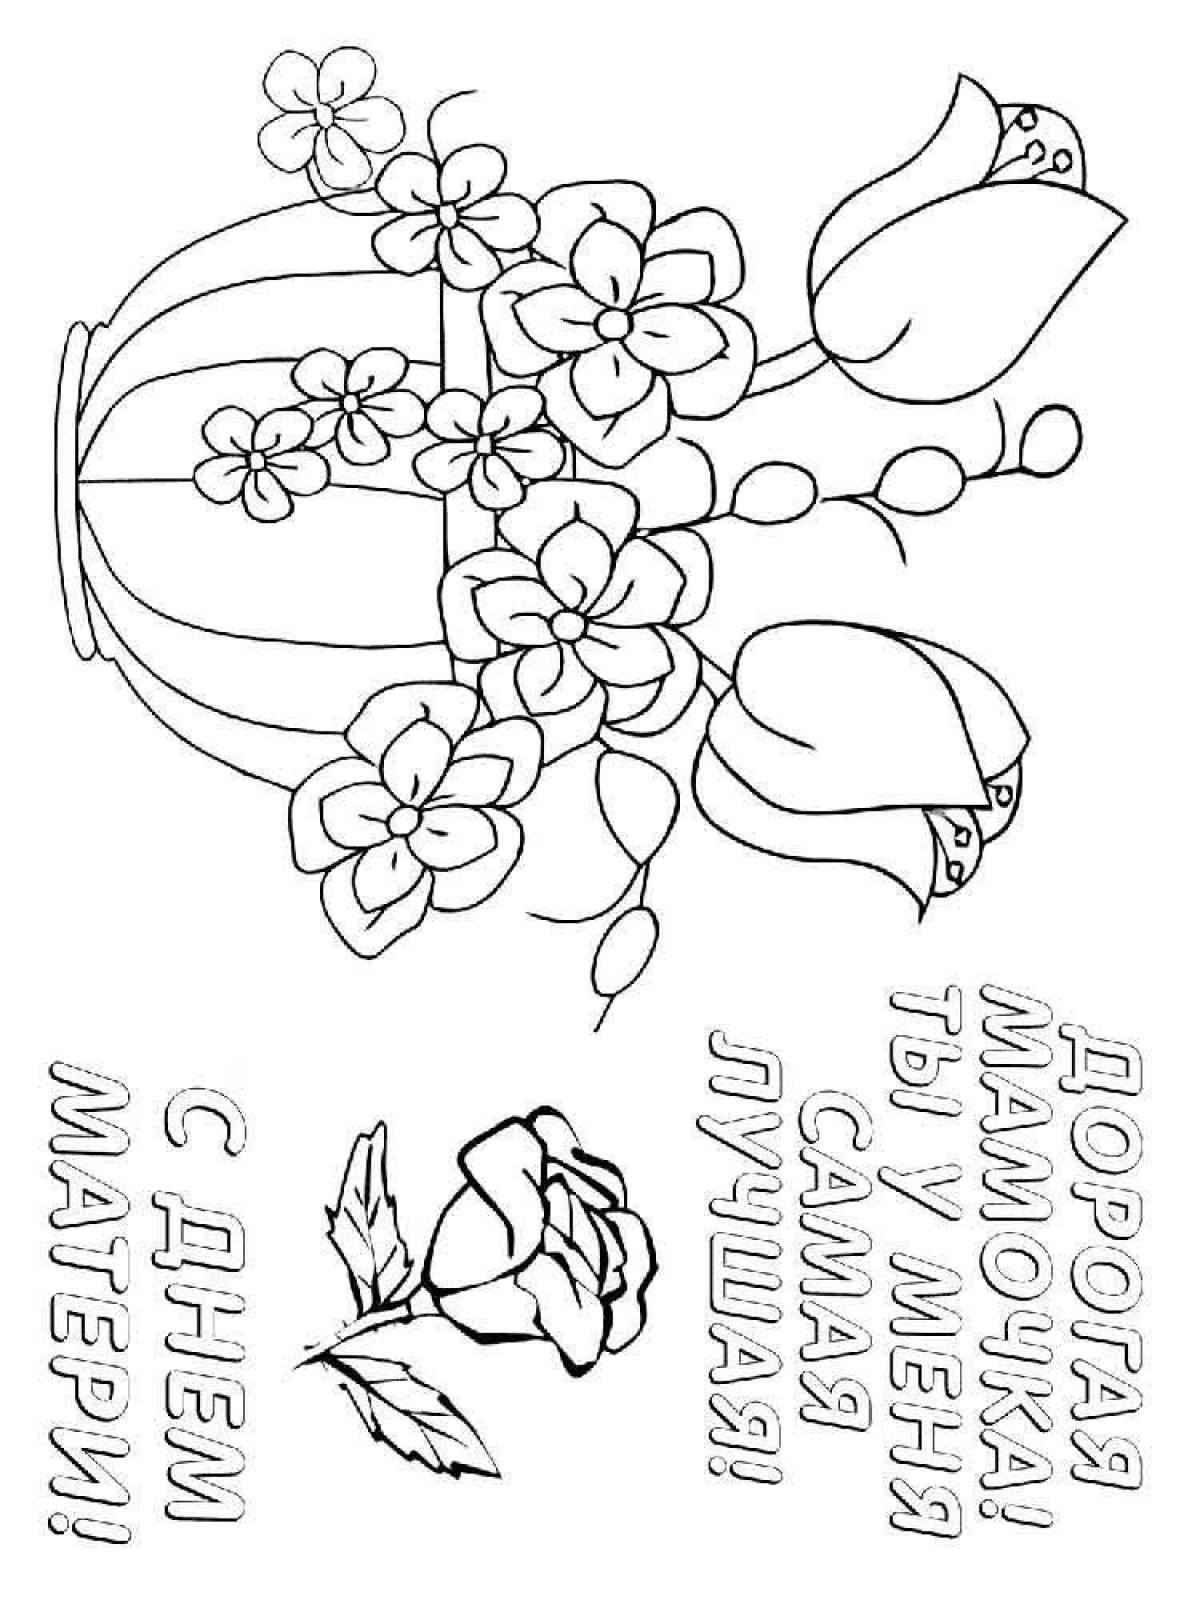 Live coloring card